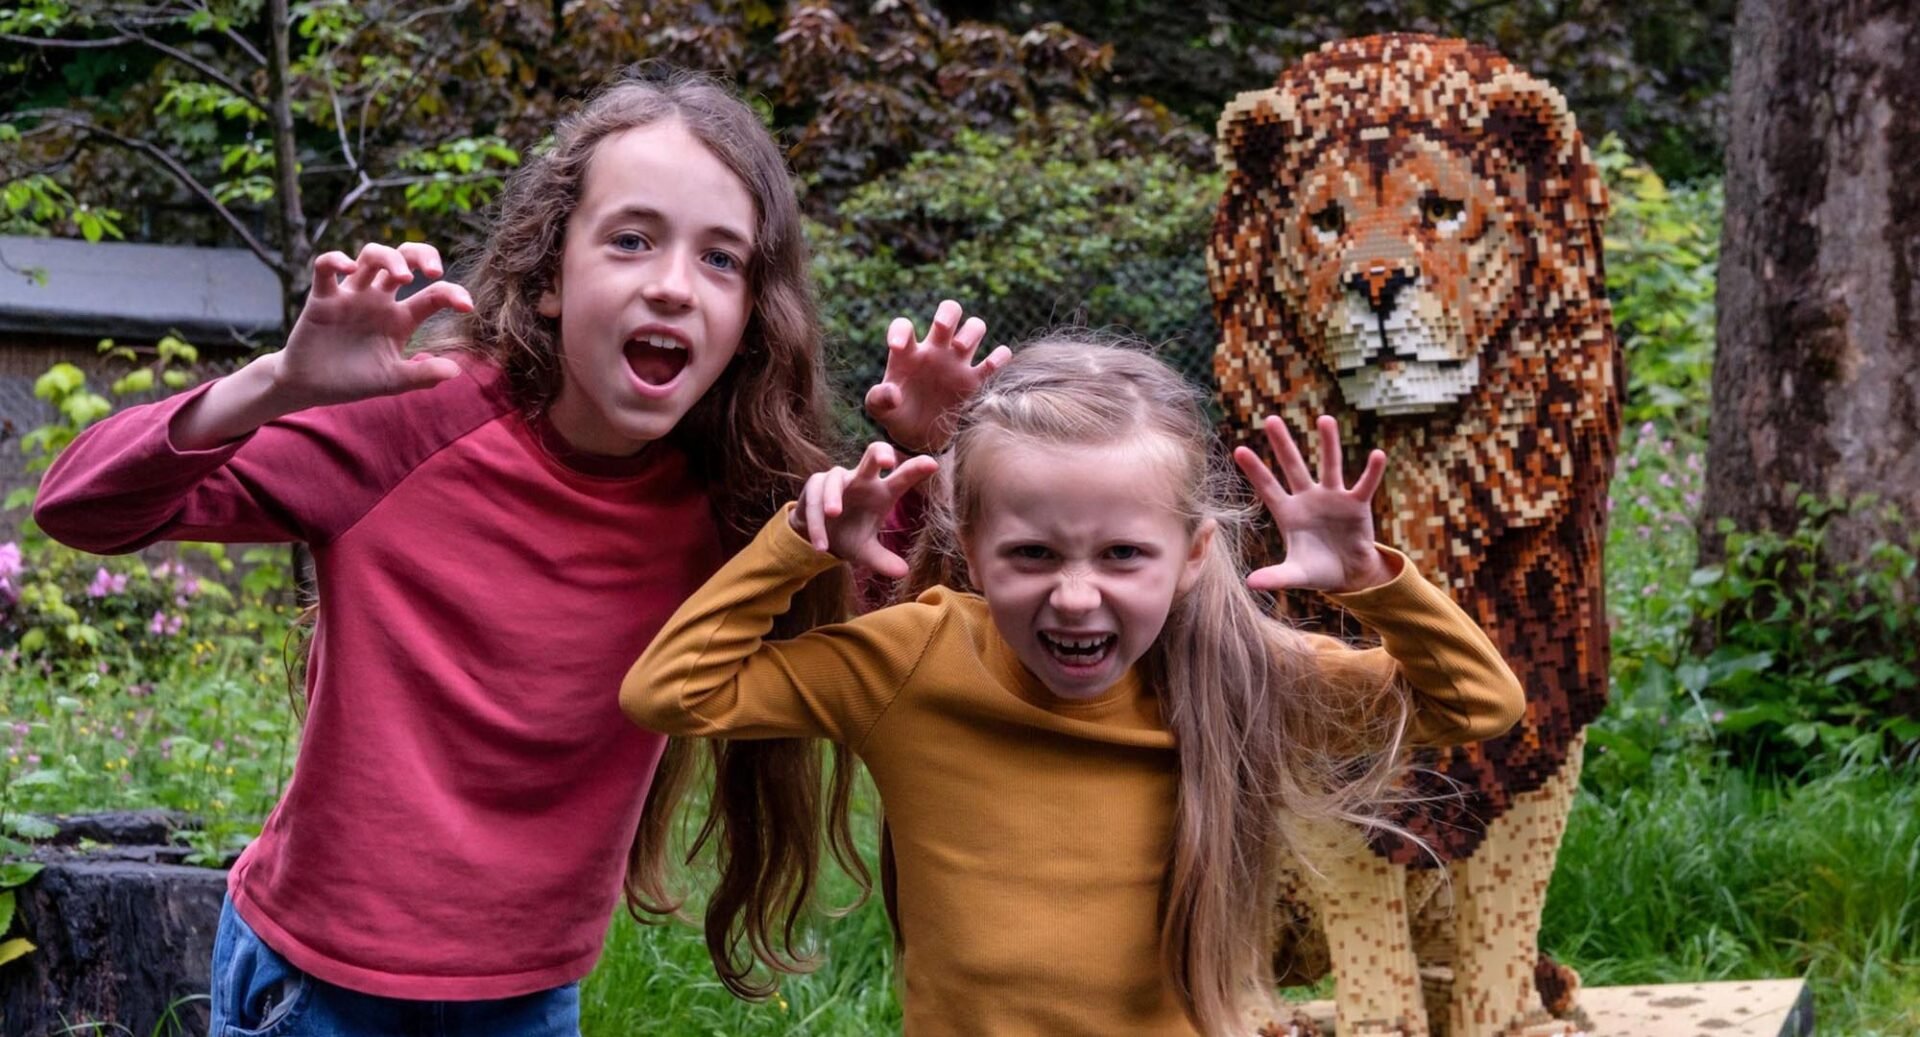 Two girls standing next to Lion made out of bricks